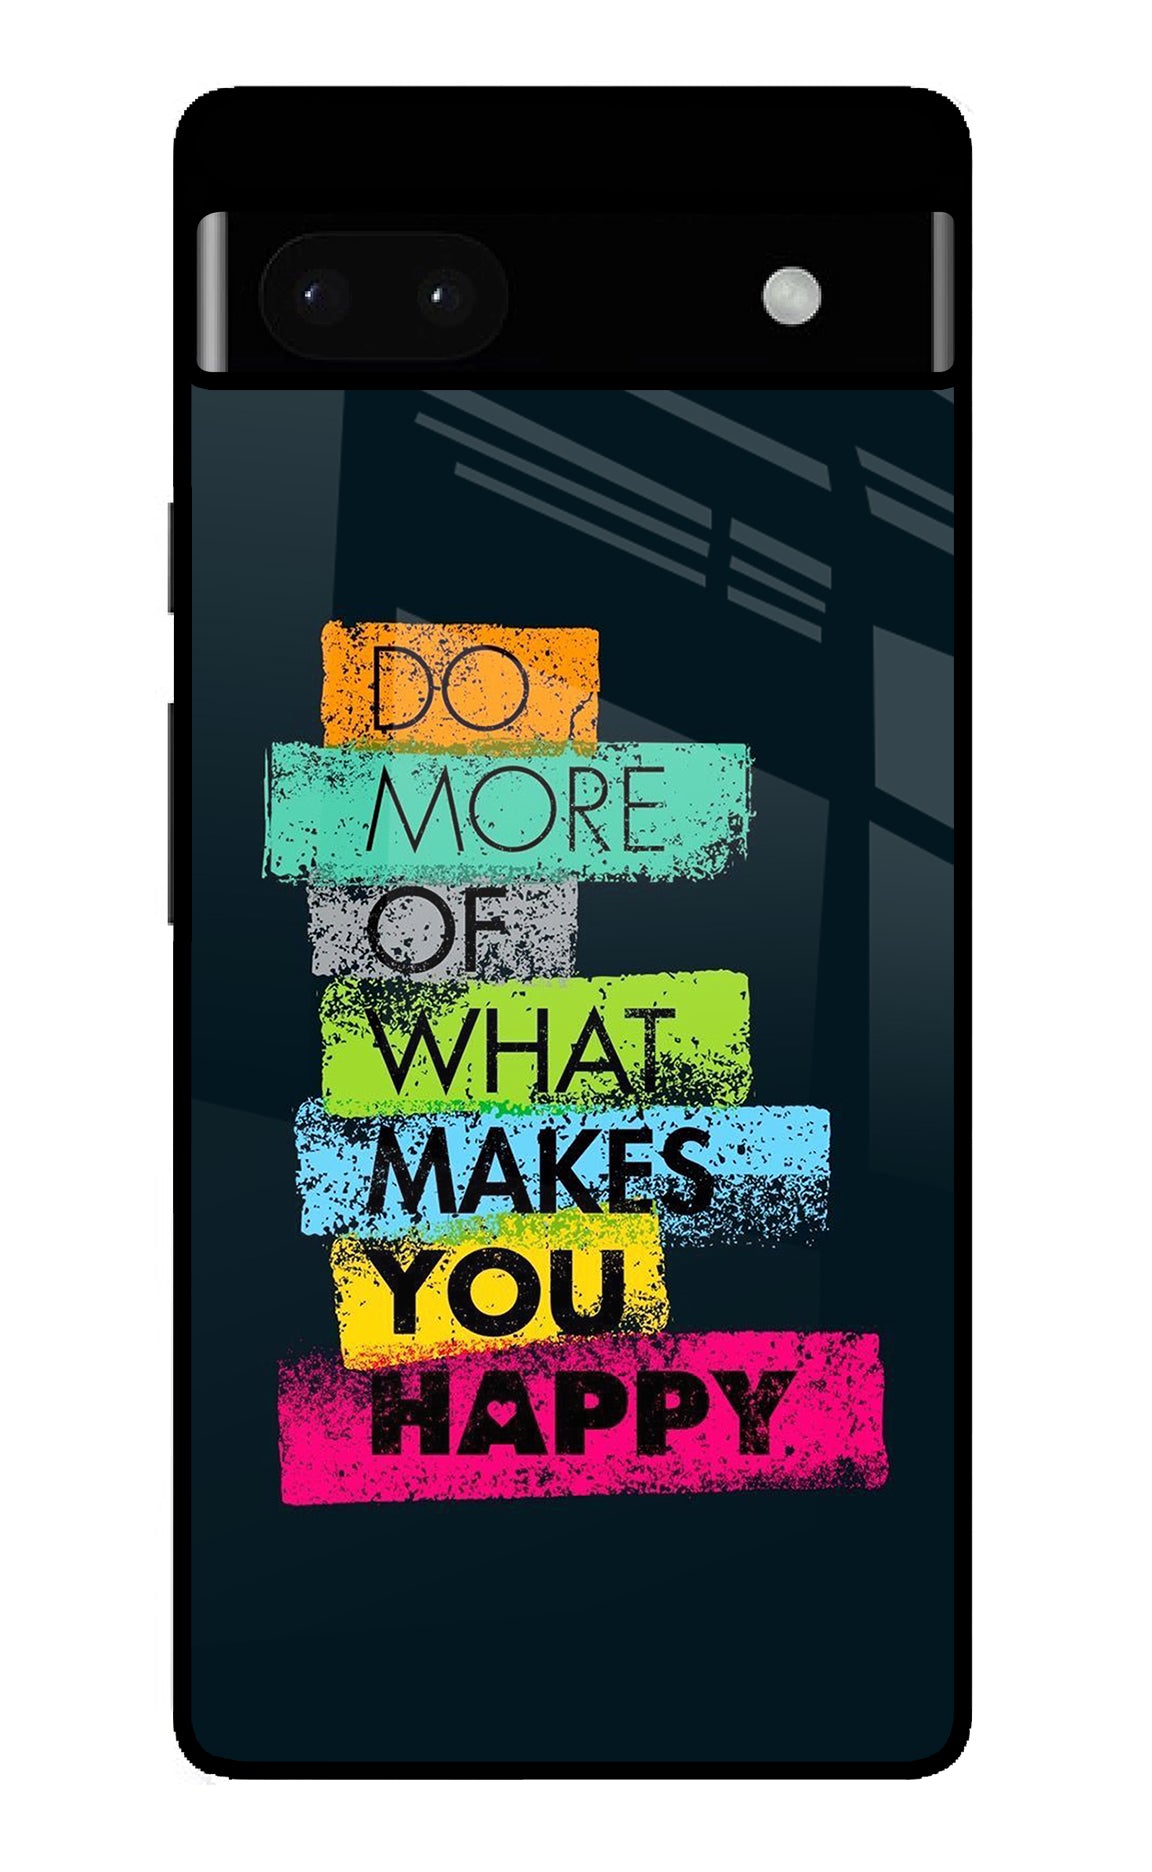 Do More Of What Makes You Happy Google Pixel 6A Back Cover